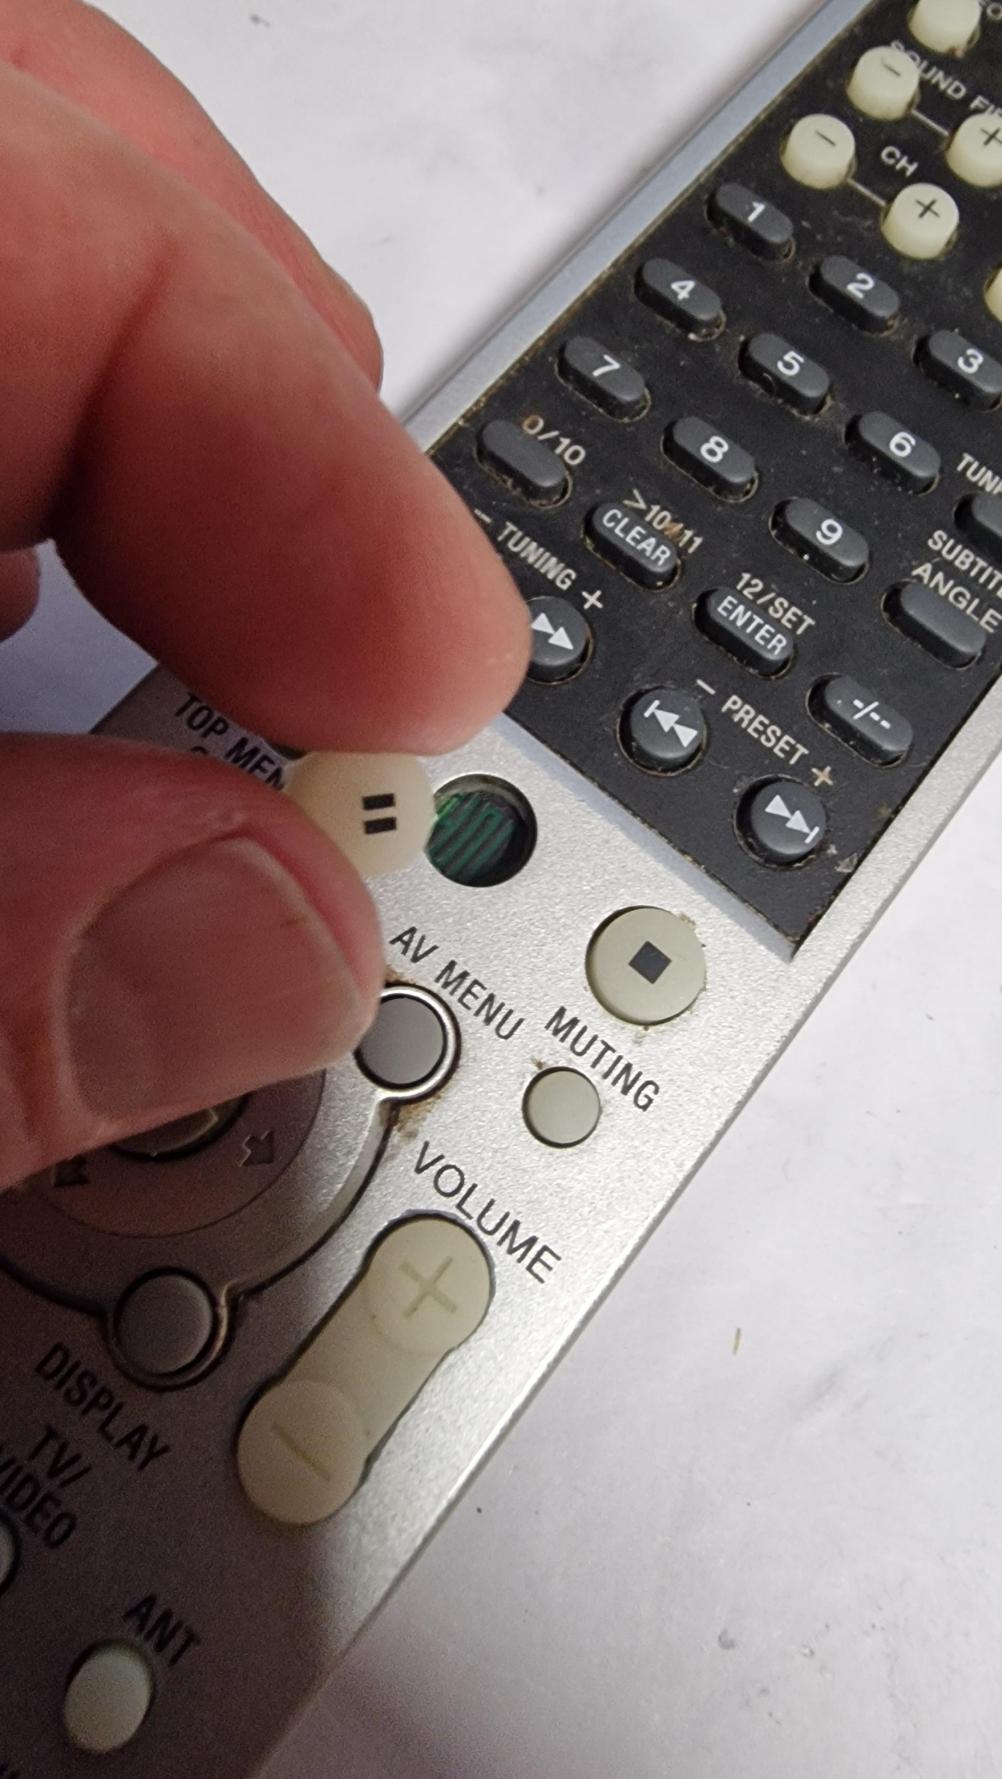 Sony RM-AAP005 Remote Control - Inside Image